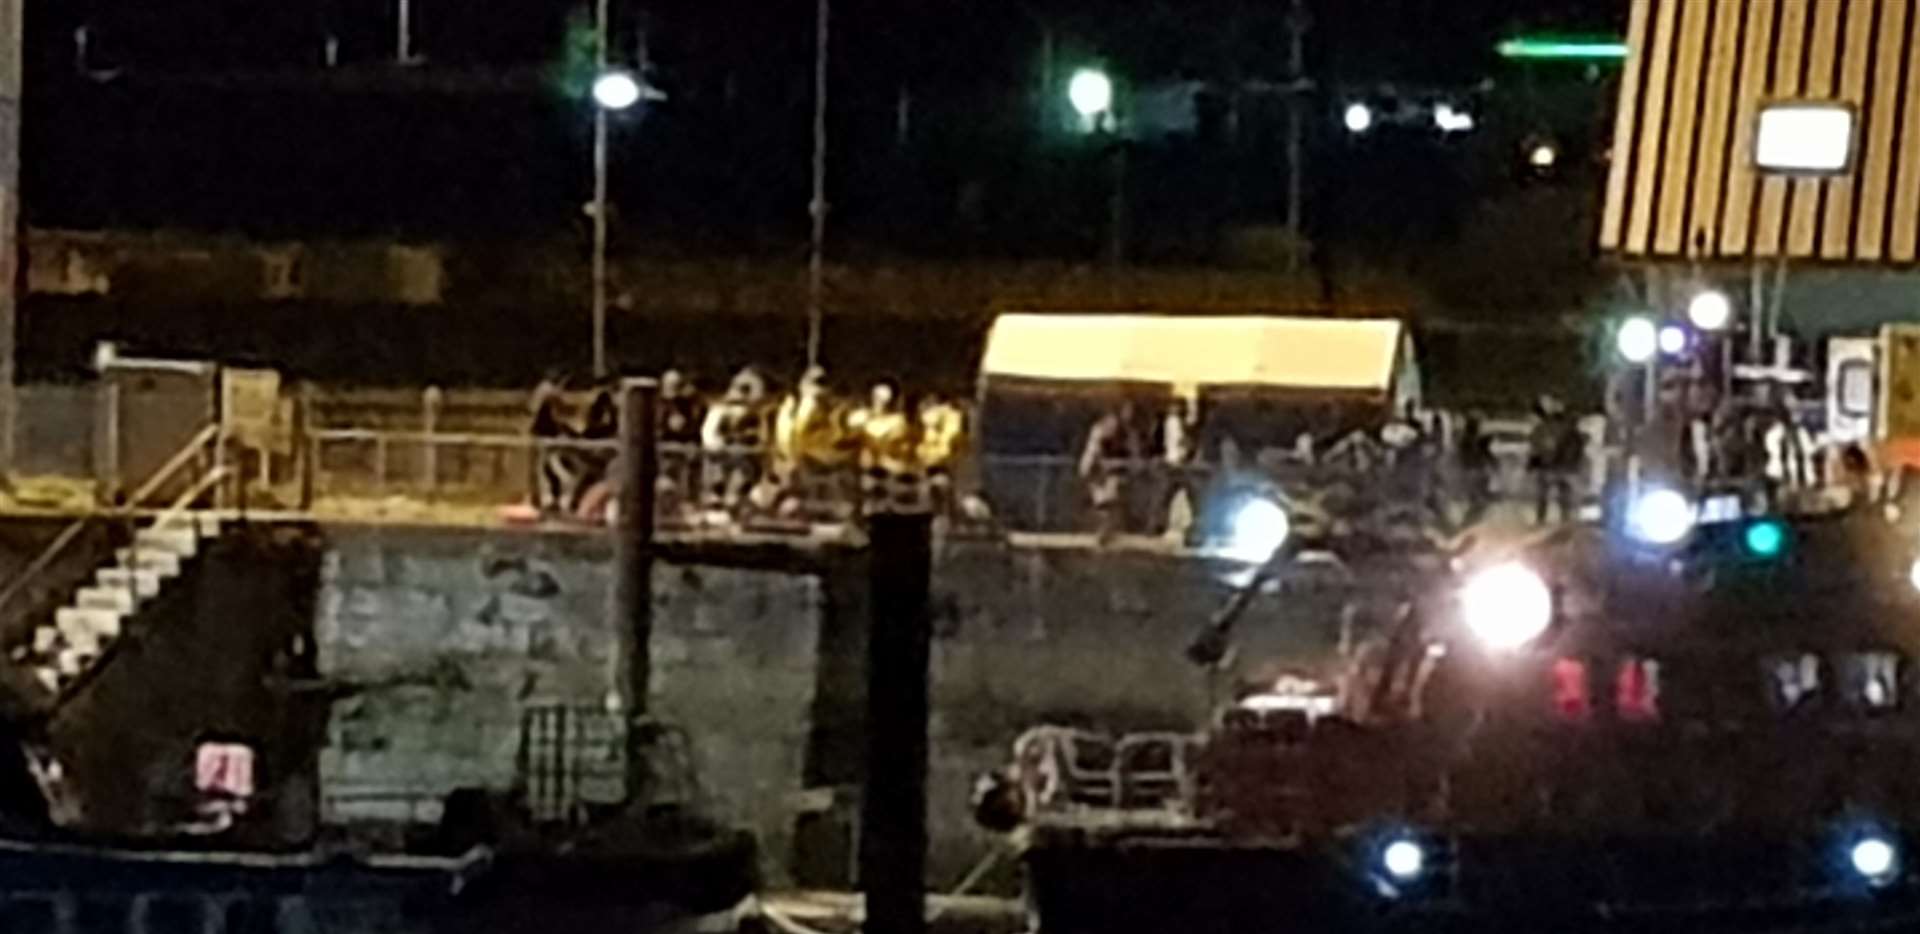 Asylum seekers rescued from the capsized boat last December arrived at Dover. Picture: Warren Grant